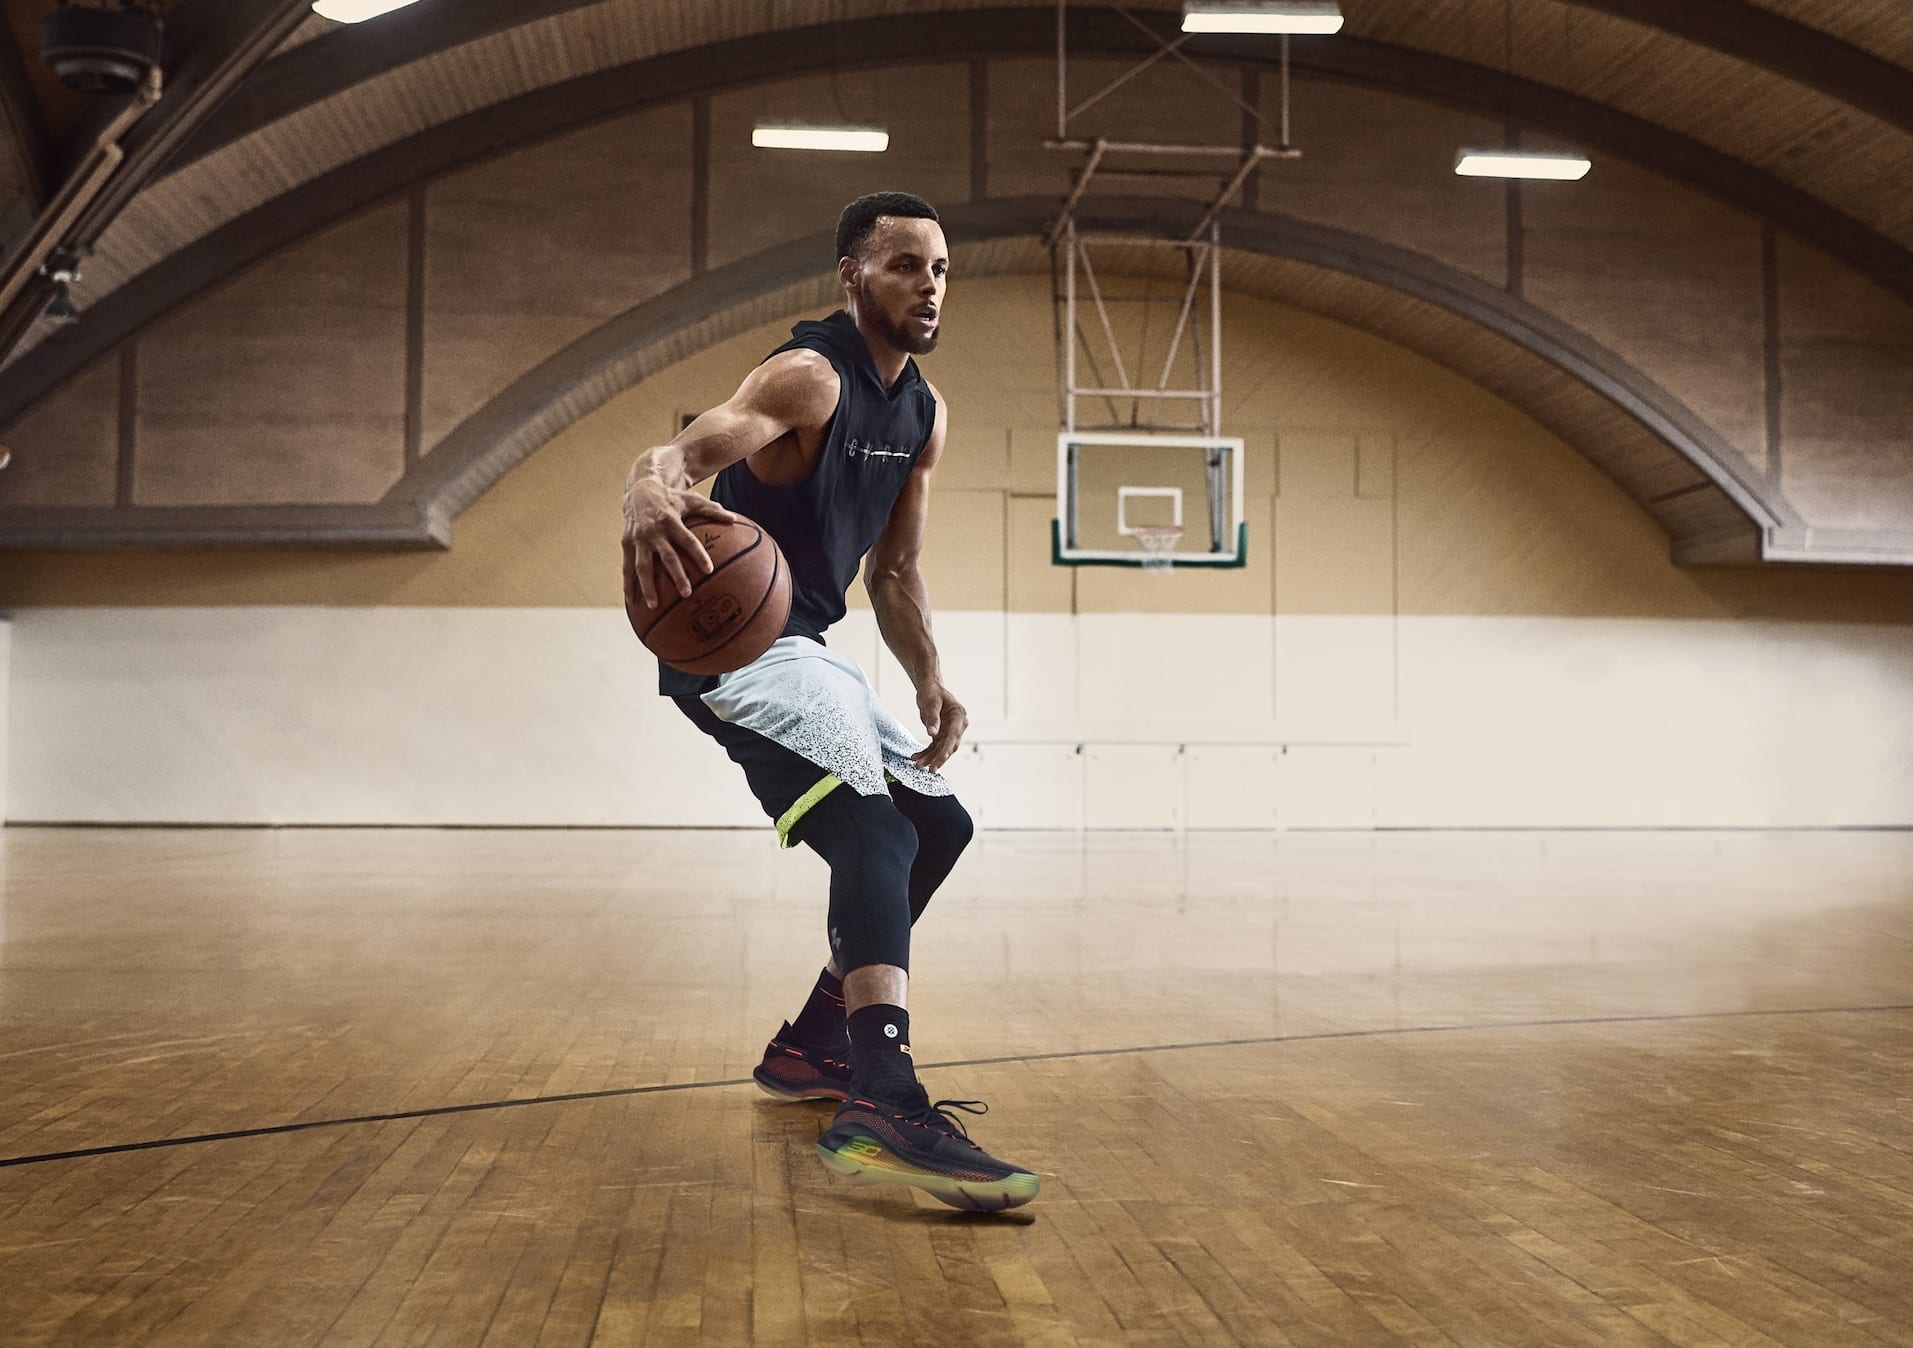 under armour stephen curry